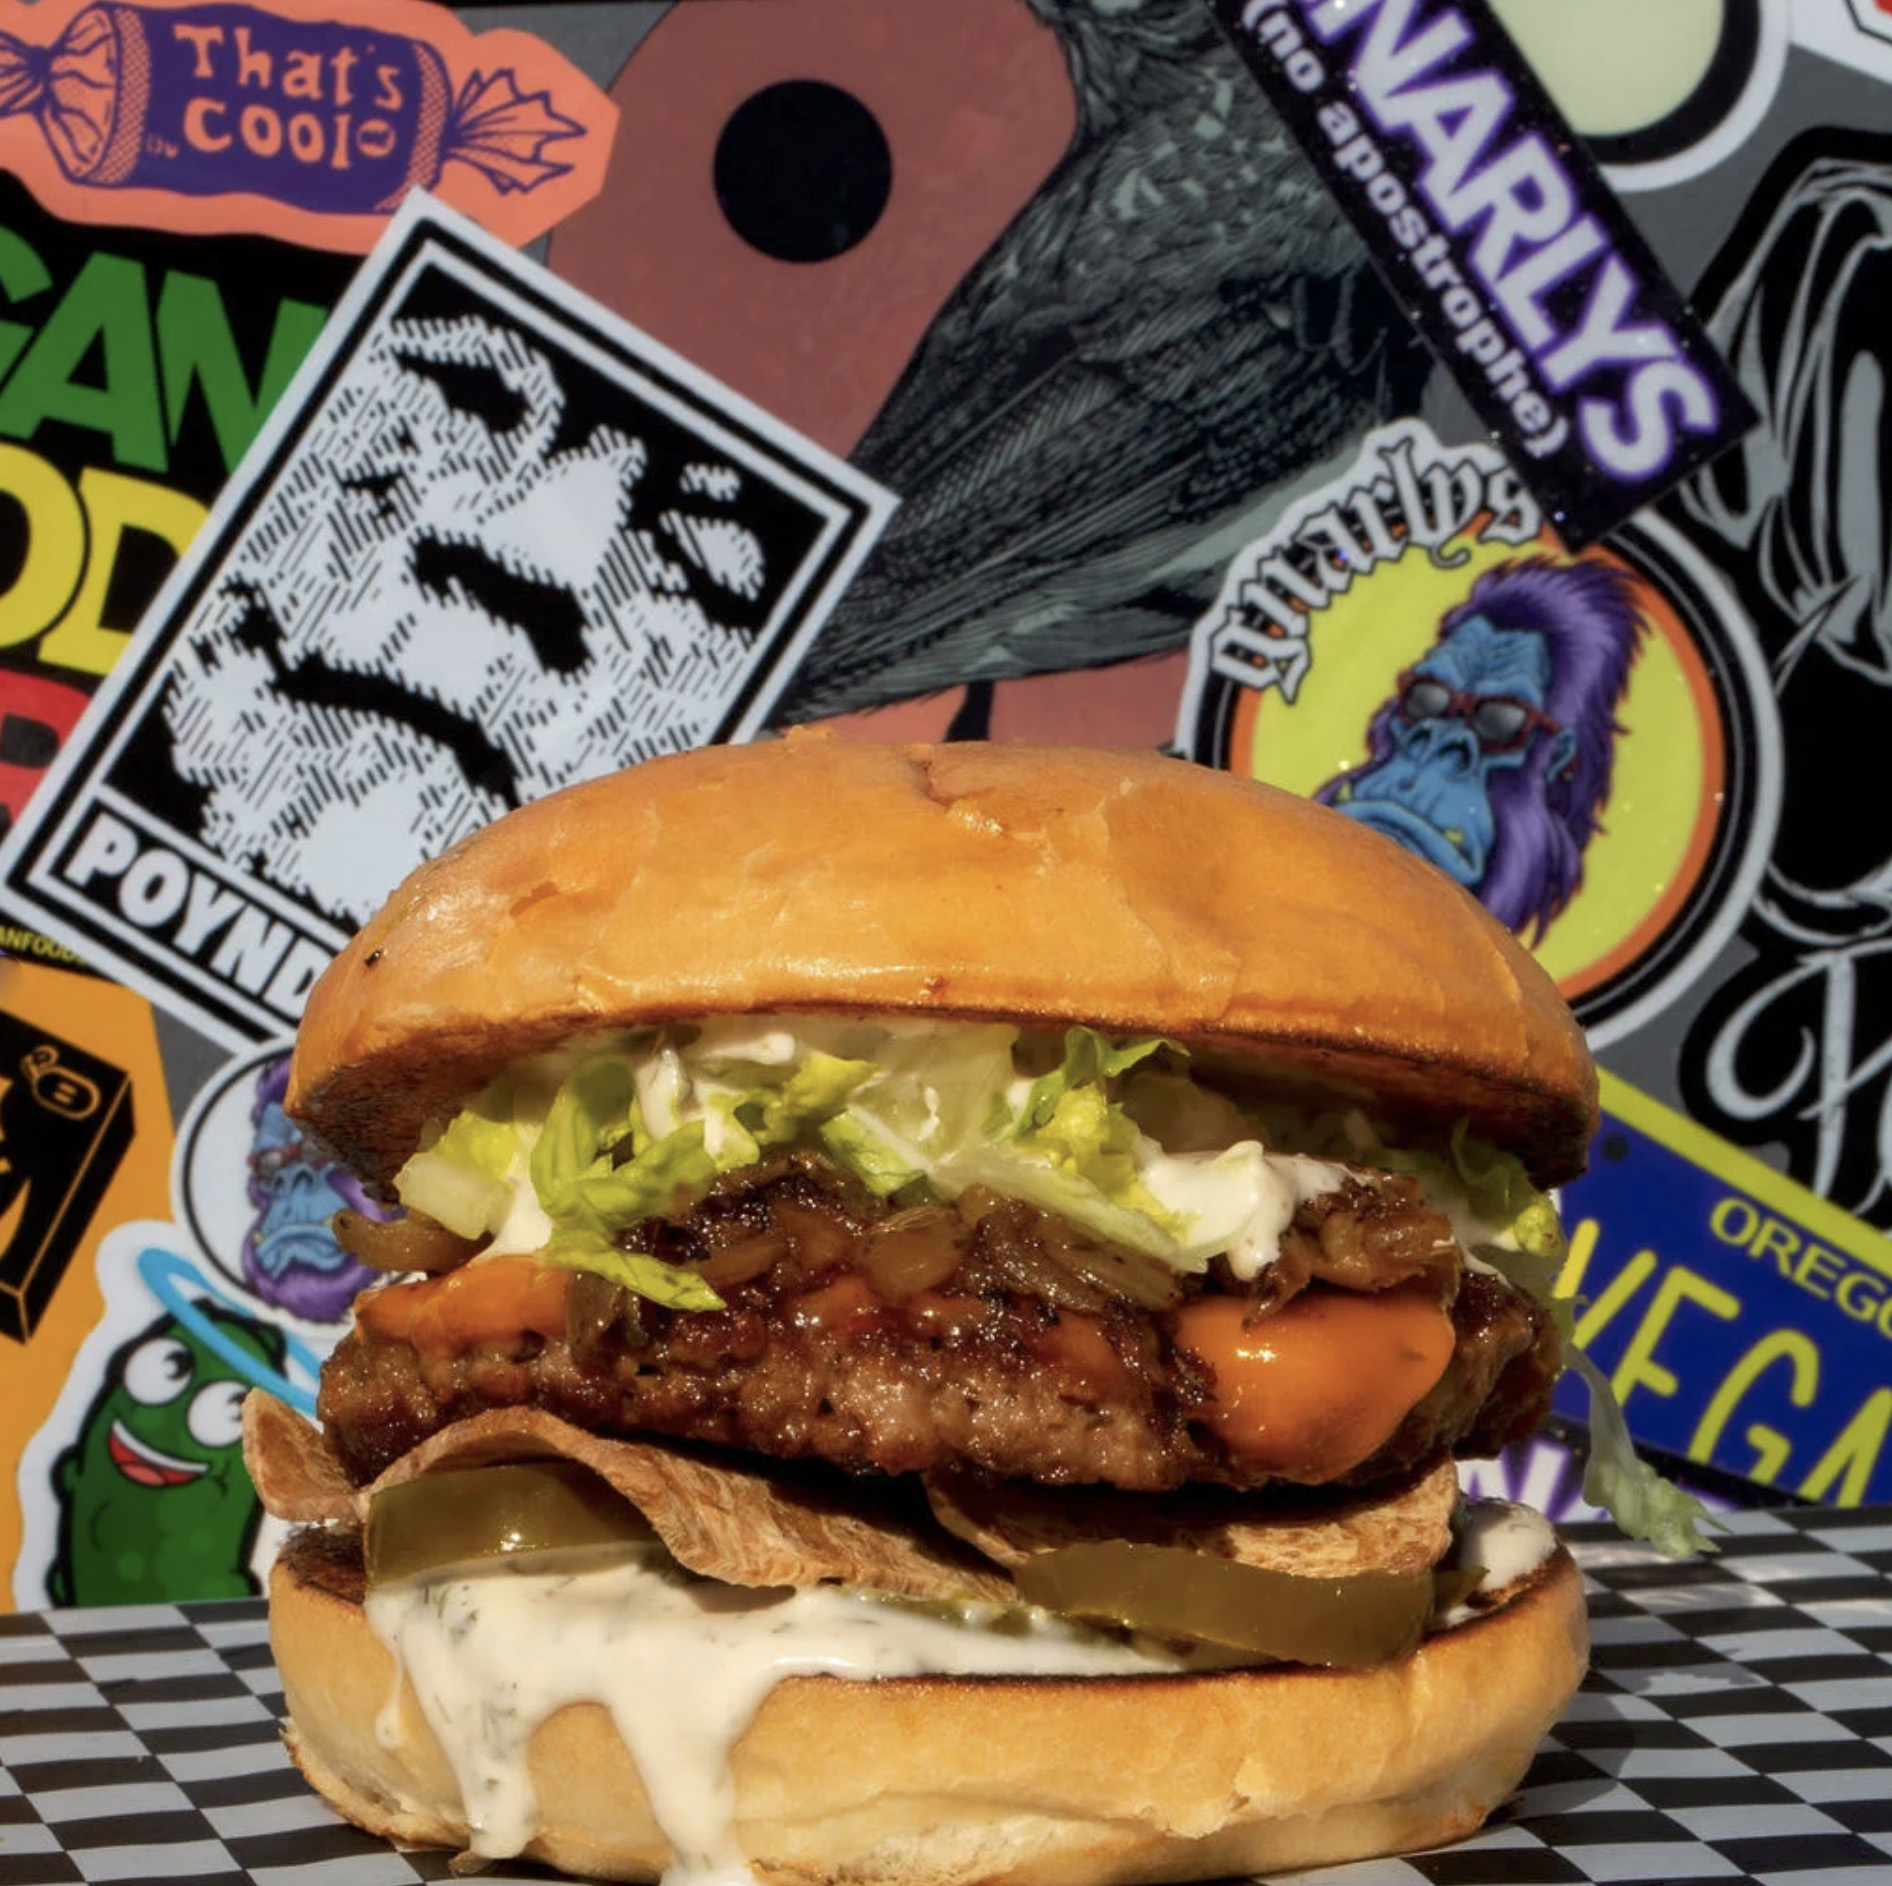 A photo of the Newport Nightmare vegan burger from Gnarlys food cart against a background covered in stickers